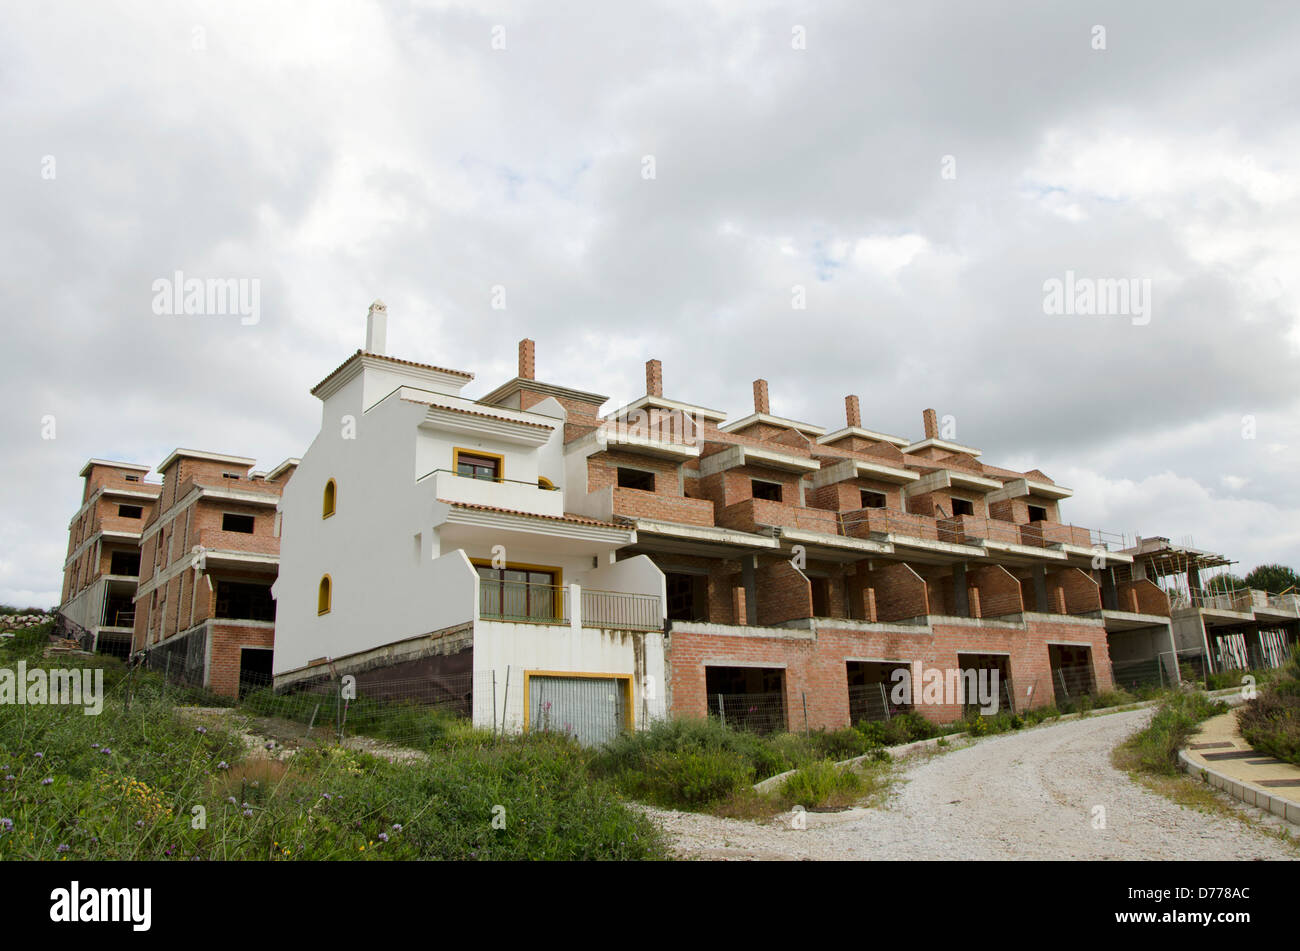 Unfinished town houses due to financial crisis Stock Photo